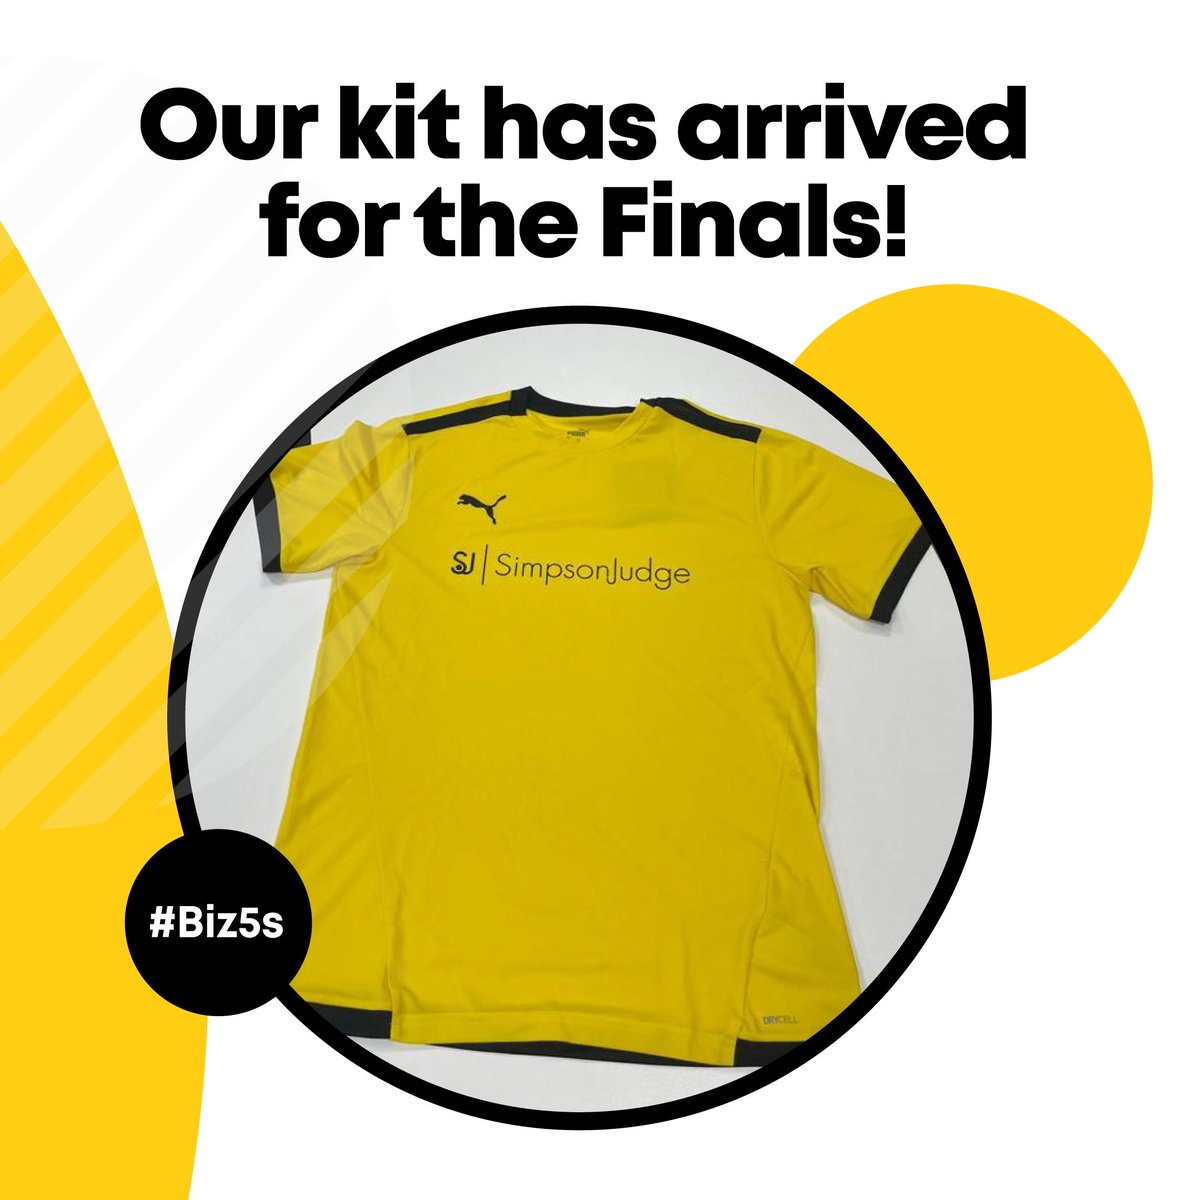 It's here! We have our new kit ready for tomorrow's National Finals of the @Businessfives 5 a side tournament in Manchester! We cant wait! Go SJ! #BusinessFives #BizFives #biz5s #Networking #Charity #ManchesterNationalFinal #FiveASide #FiveASideFootball #SimpsonJudge